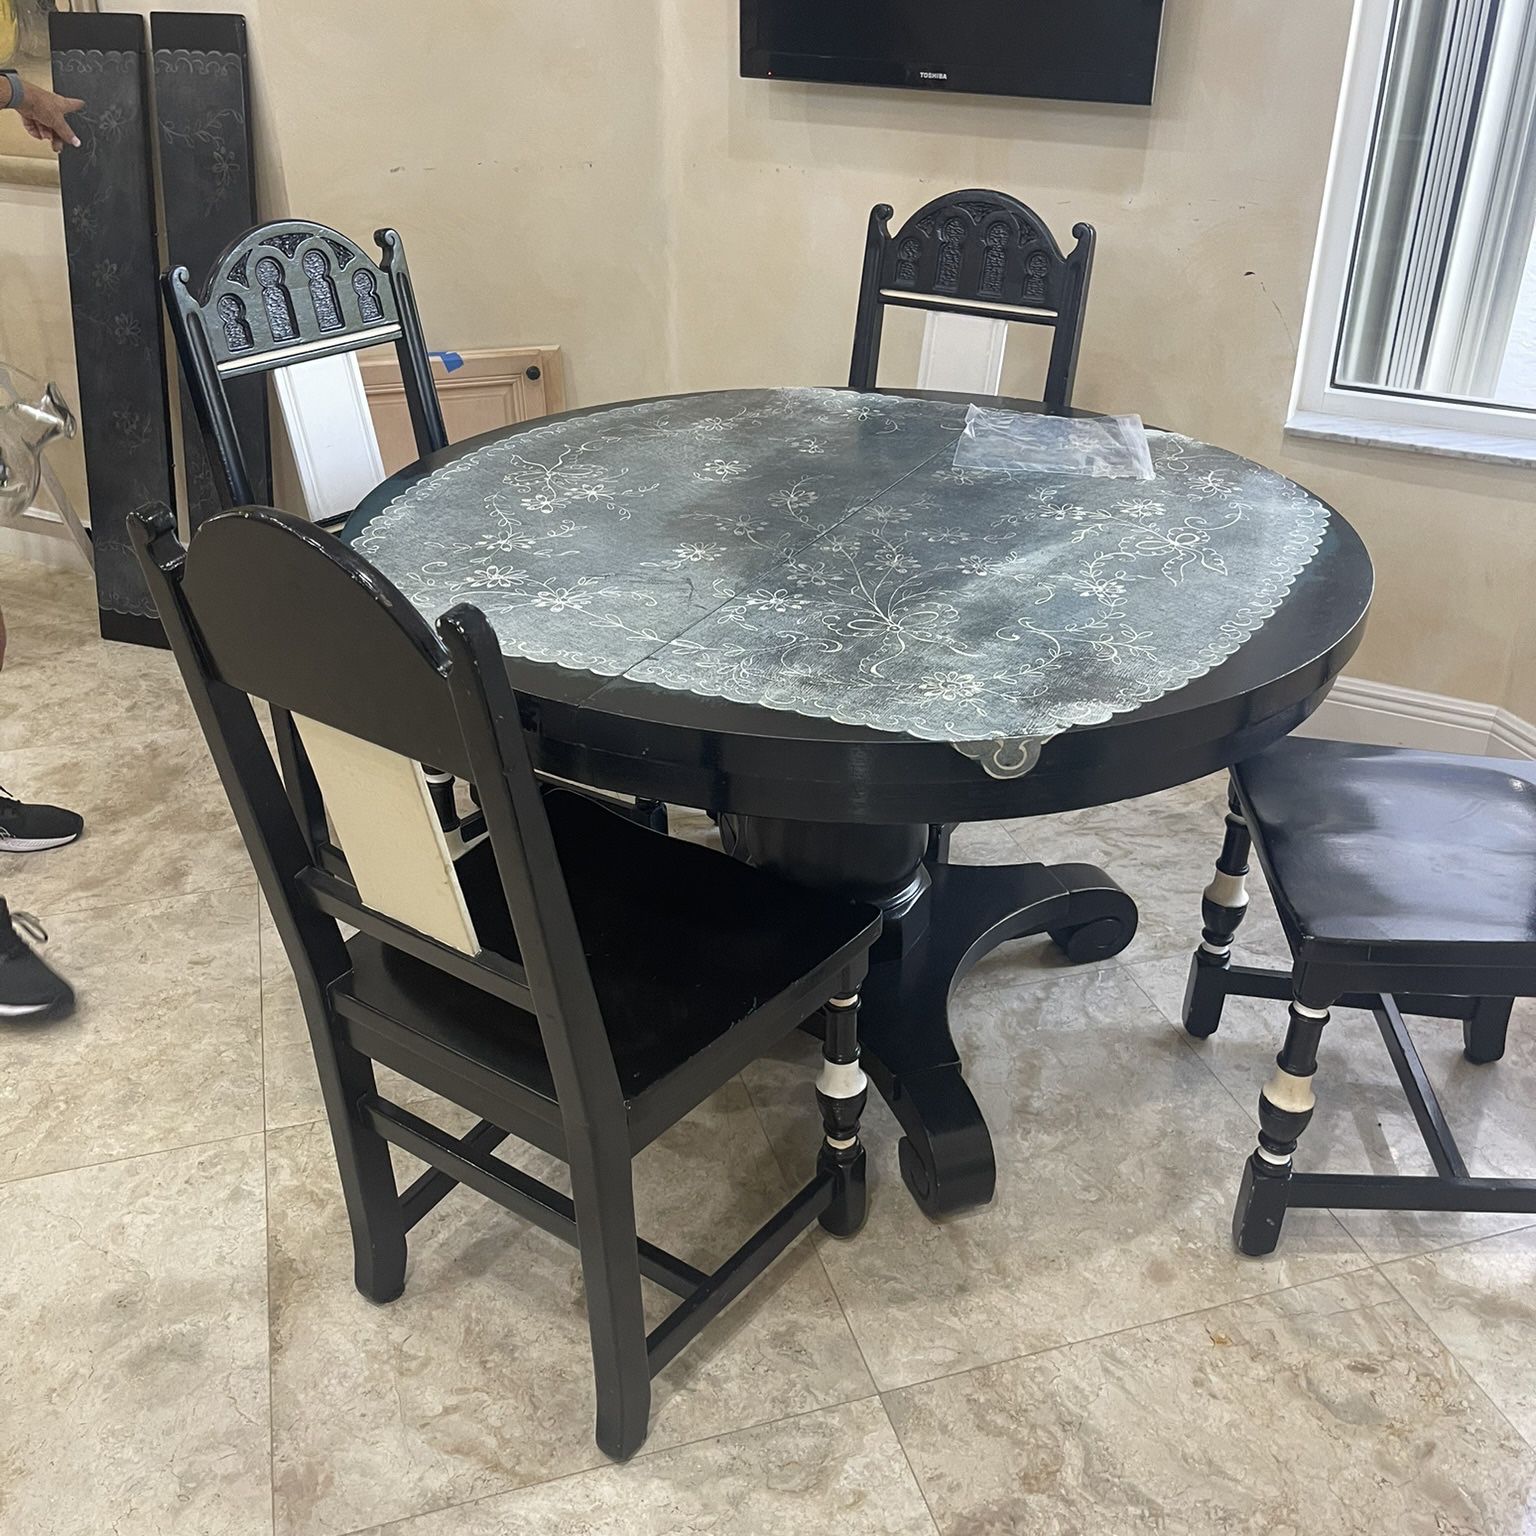 Vintage Kitchen Table W/ 4 Chairs - $100